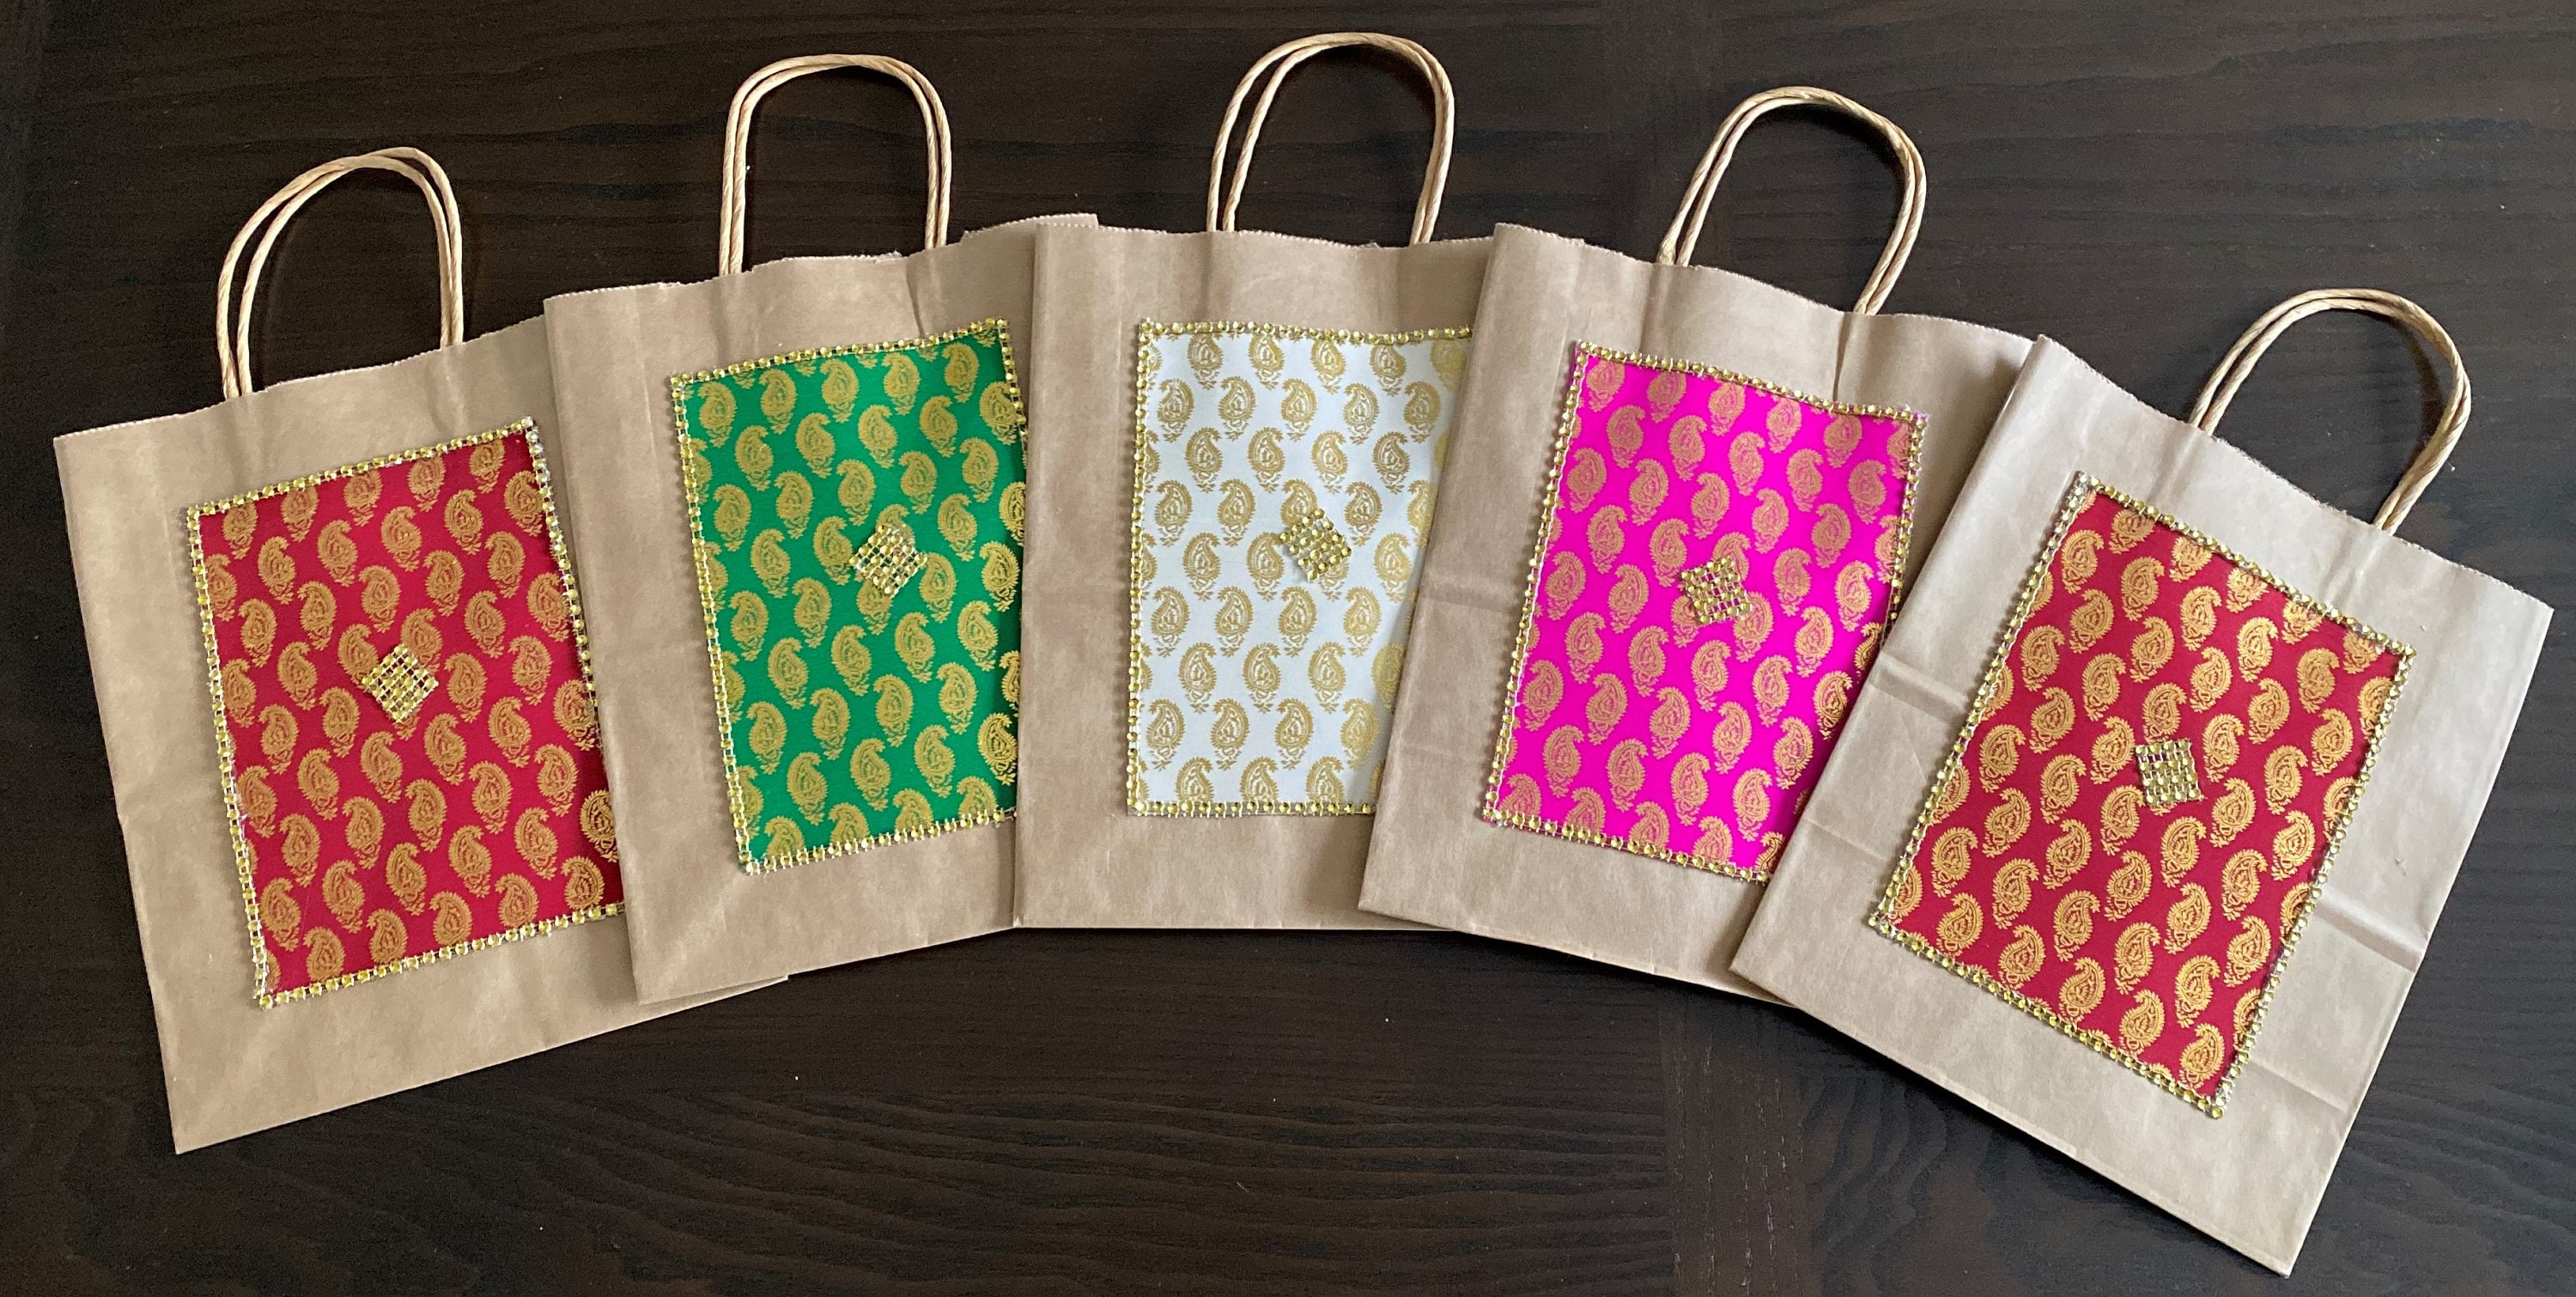  Eco-Friendly Jute Bags with Lotus Print - 10 x 8 - Beach Bag,  Reusable & Biodegradable - Perfect for Gifts, Return Gifts, Indian Gift Bags,  Puja Return Gifts, Wedding Favors, Wedding